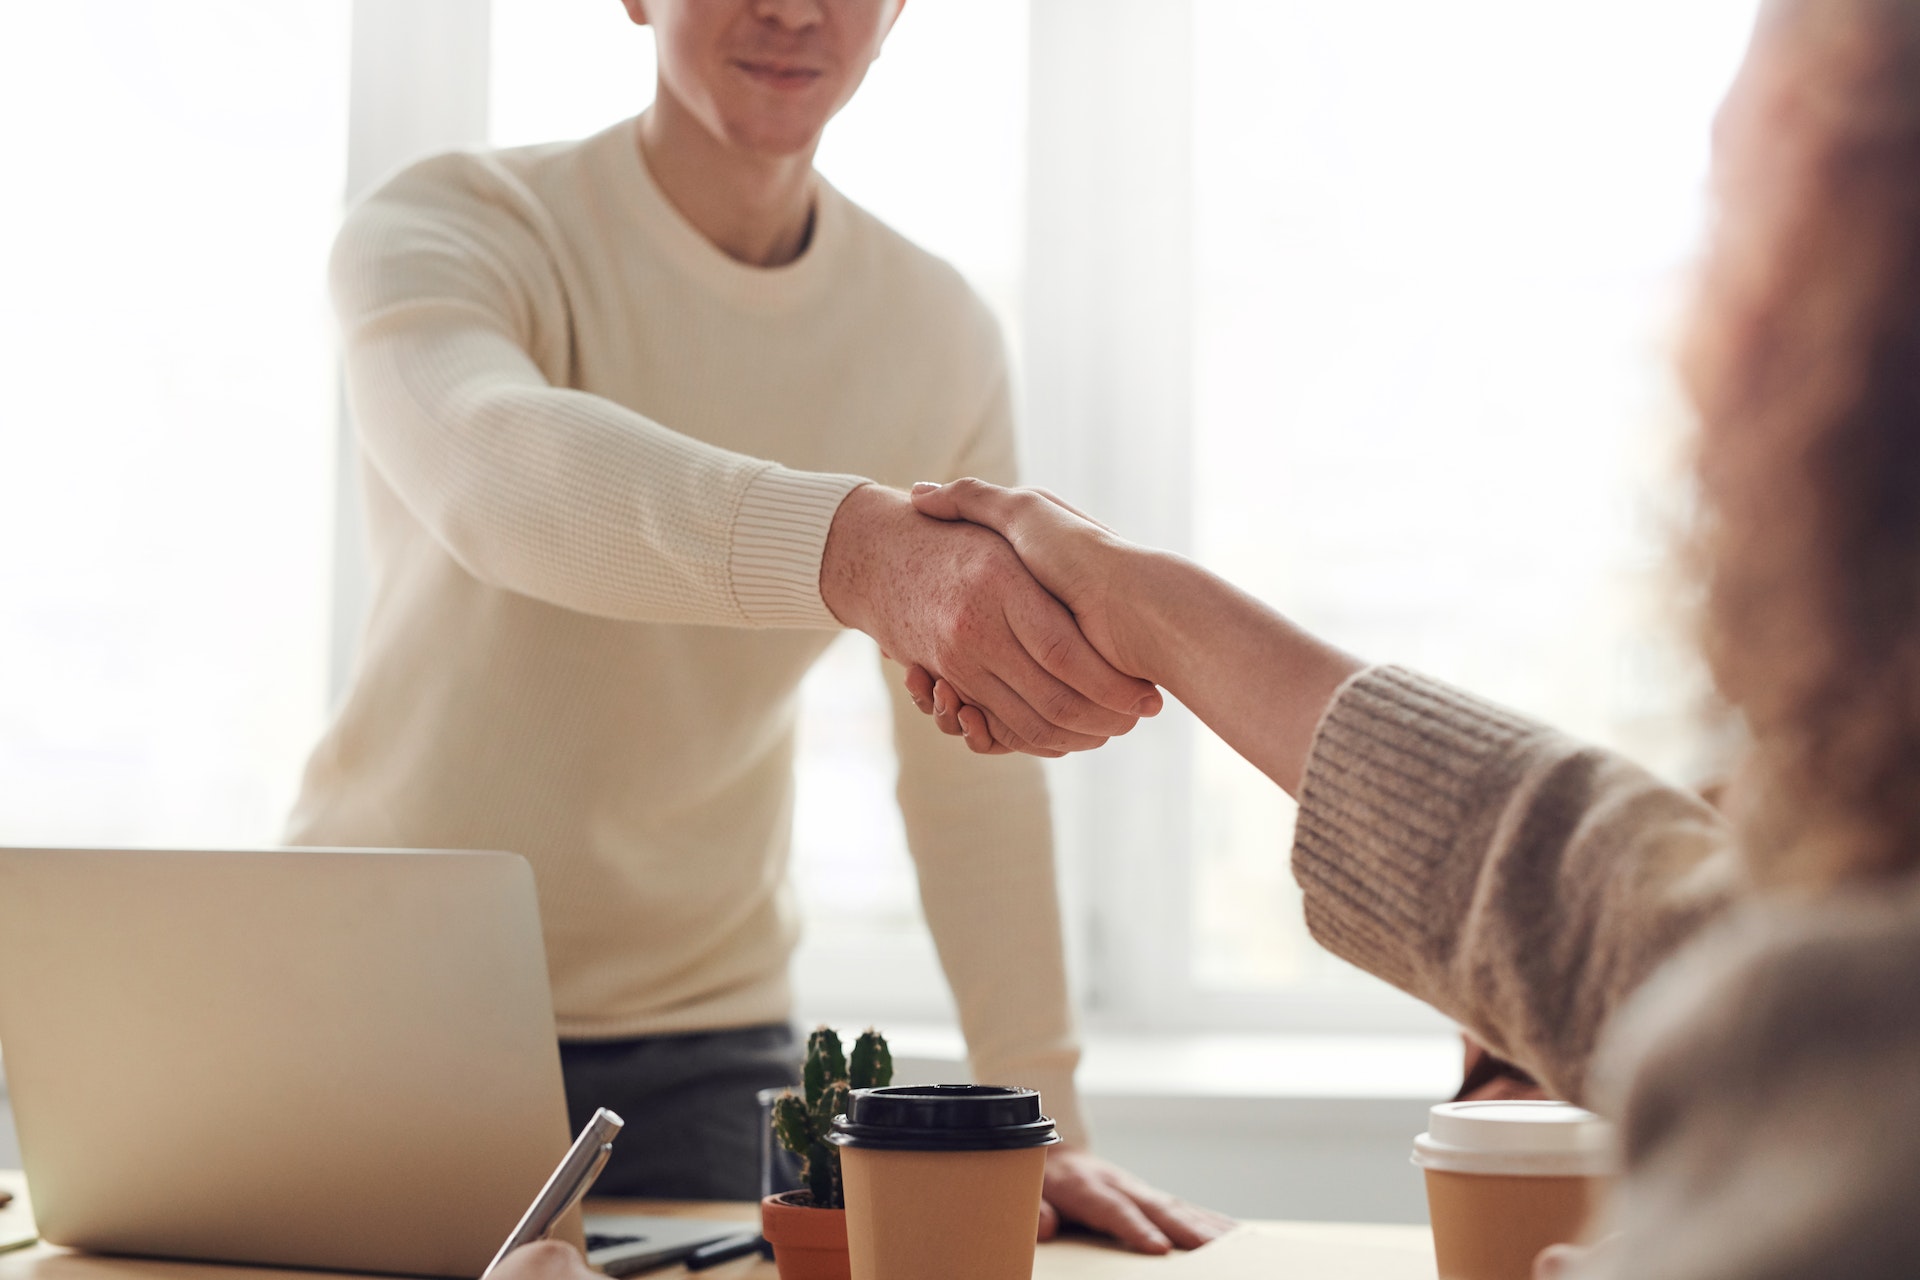 A man shaking his hand with a woman in an office | Source: Pexels